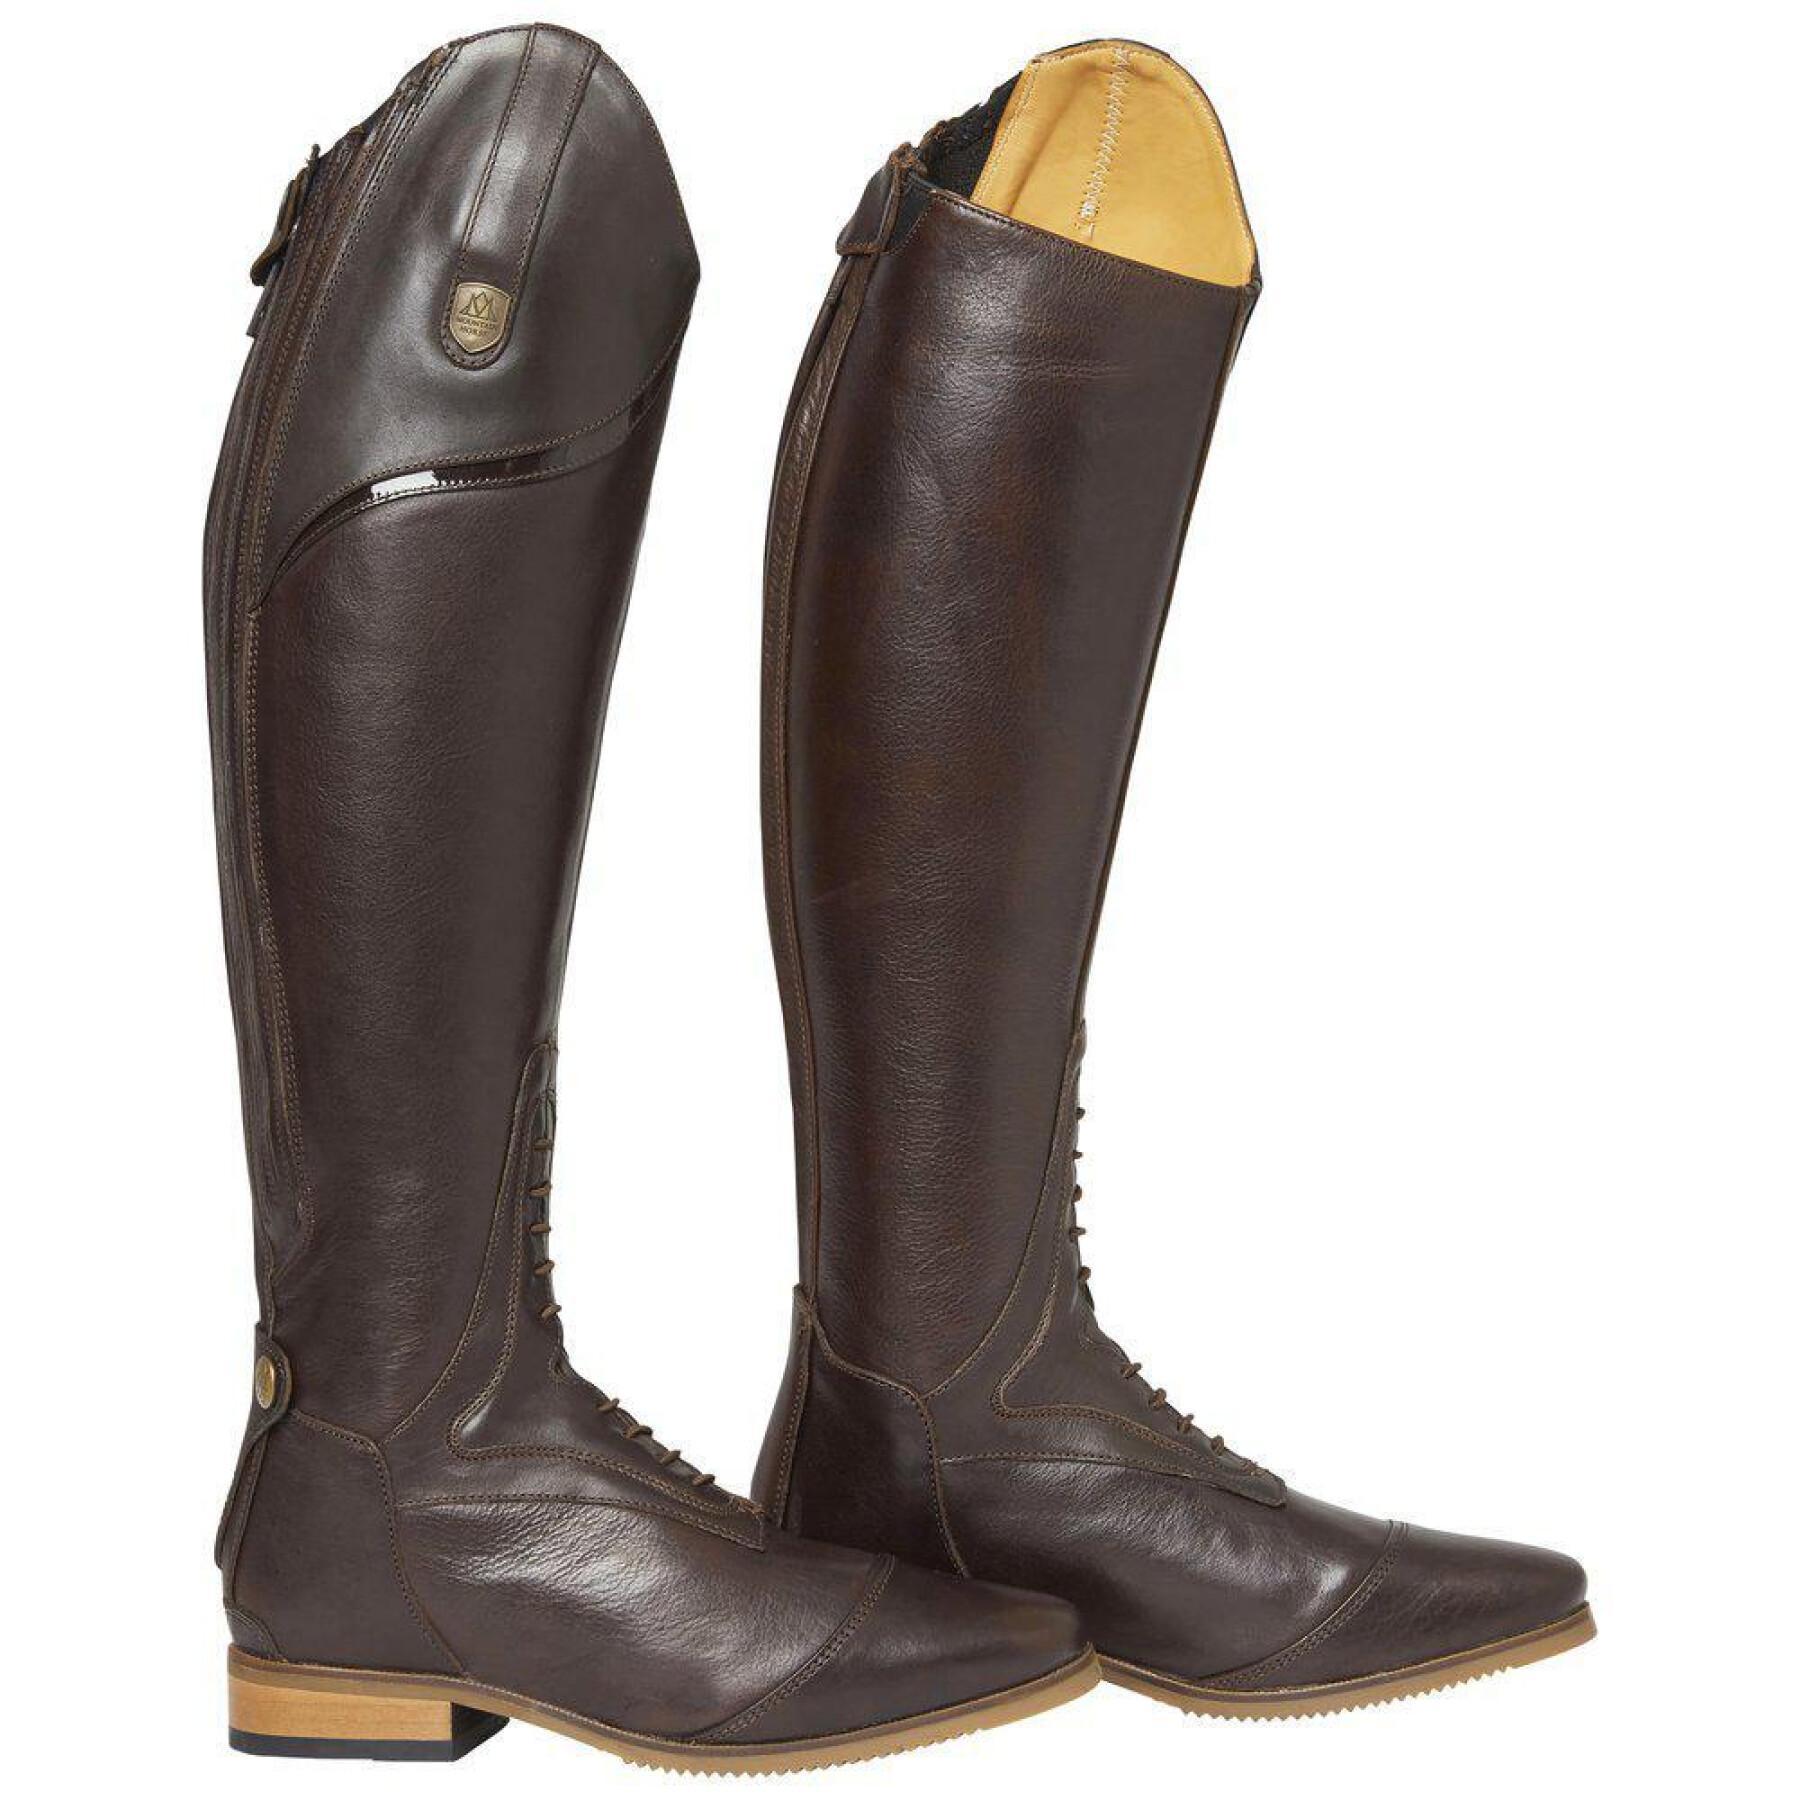 Women's leather riding boots Mountain Horse Sovereign HR Short Wide